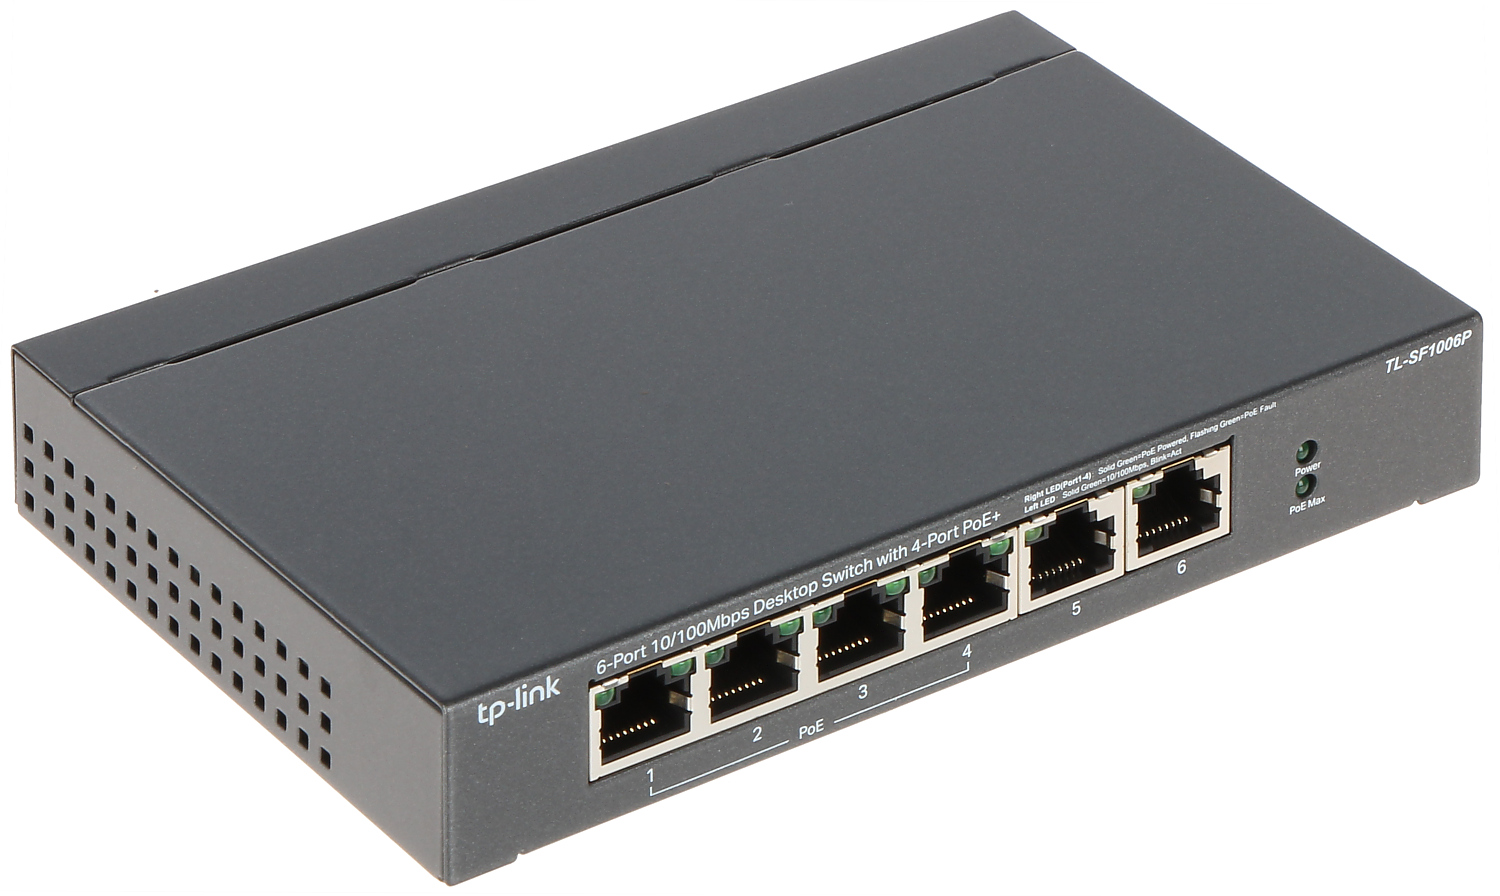 SWITCH POE TL-SF1006P 6-PORT TP-LINK - PoE Switches with 8 Ports support -  Delta